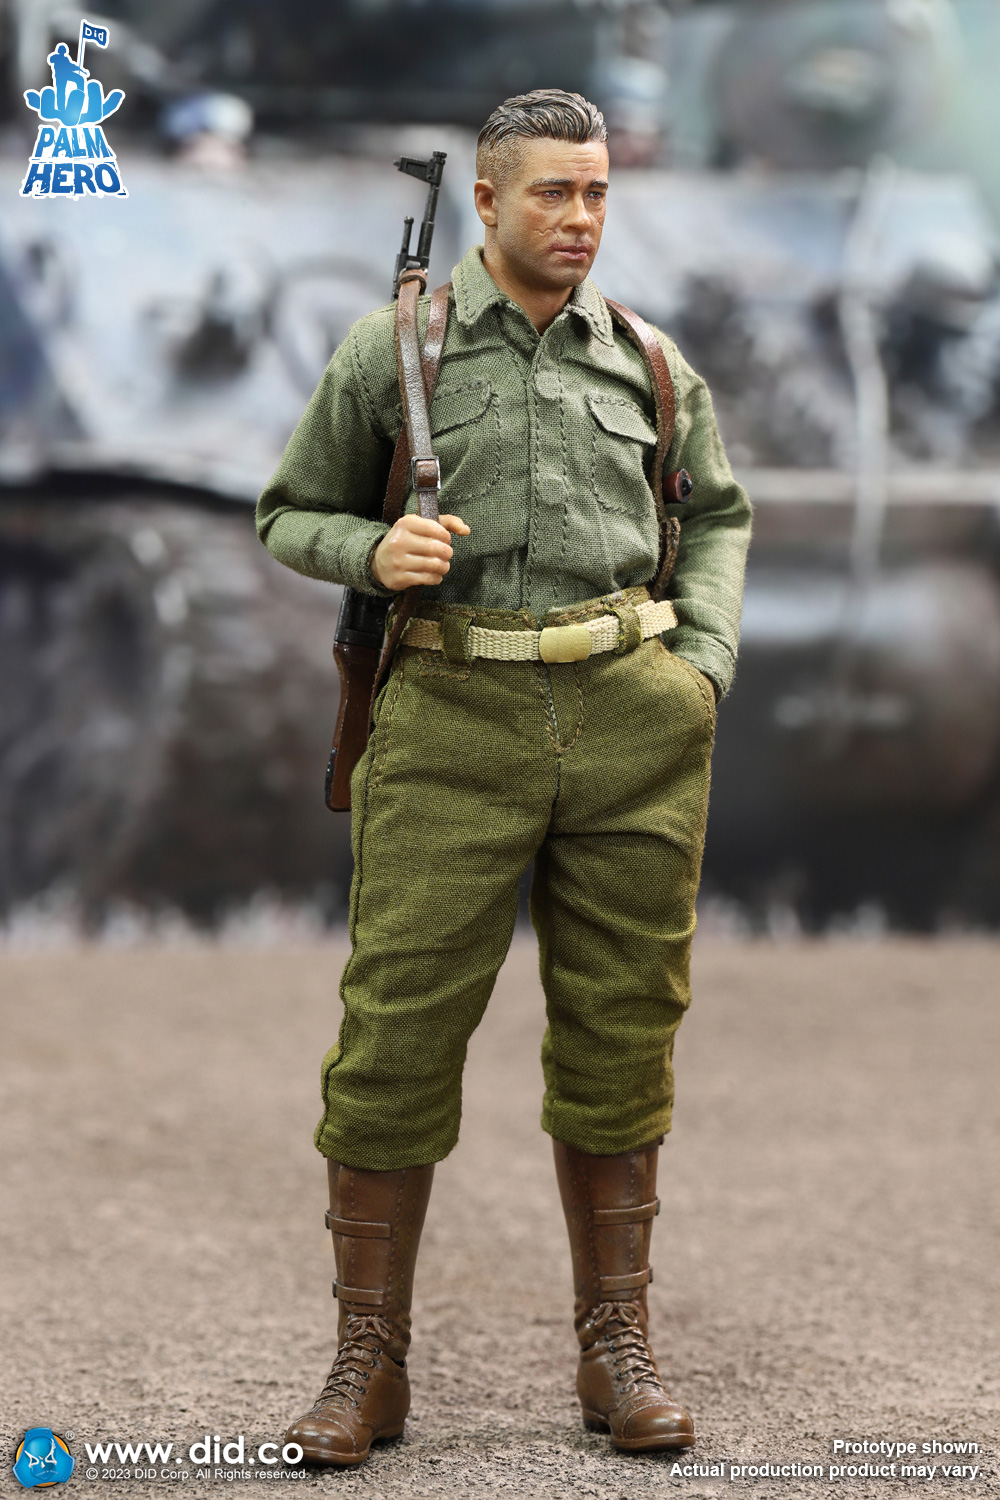 NEW PRODUCT: DID - 1/12 Pocket Hero Series Commander "Sherman" of the Second Armored Division of the US Army in World War II (#XA80019) 0616